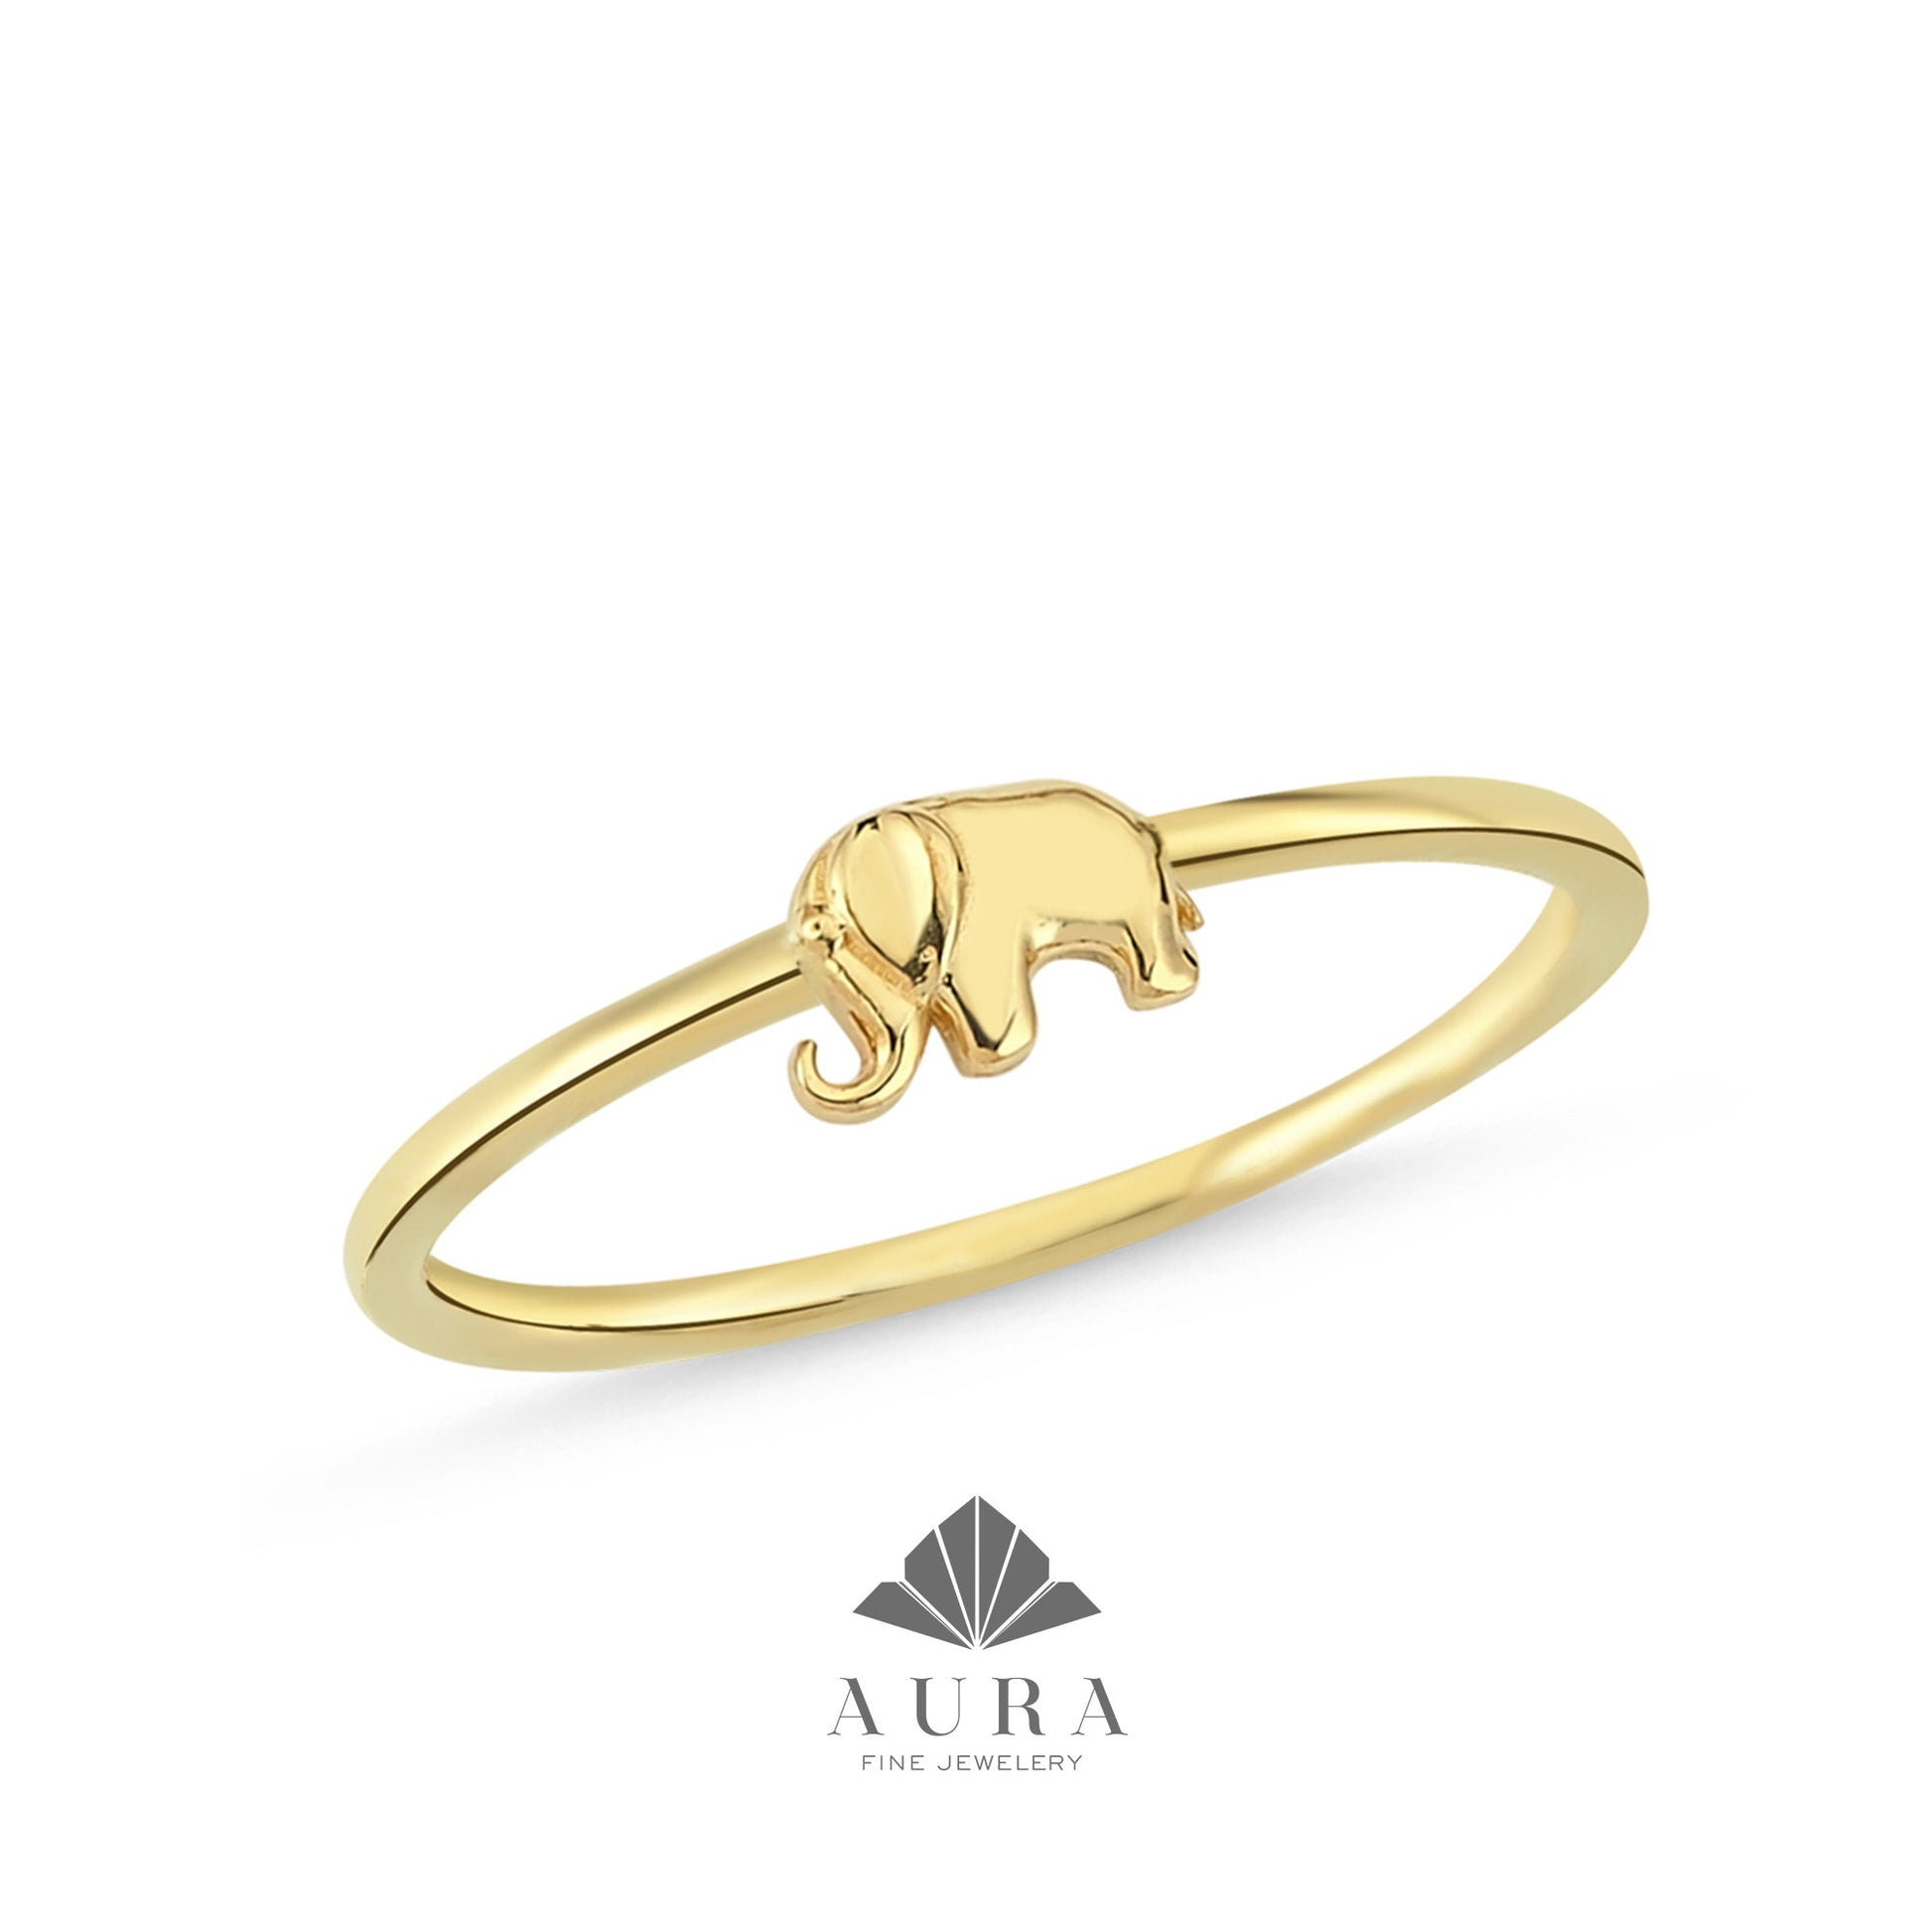 14K Gold Elephant Ring, 3 Elephant Ring, Stacking Dainty Band, Animal Gold Ring, Good Fortune Symbol, Unique Elephant Ring, Gift for Her